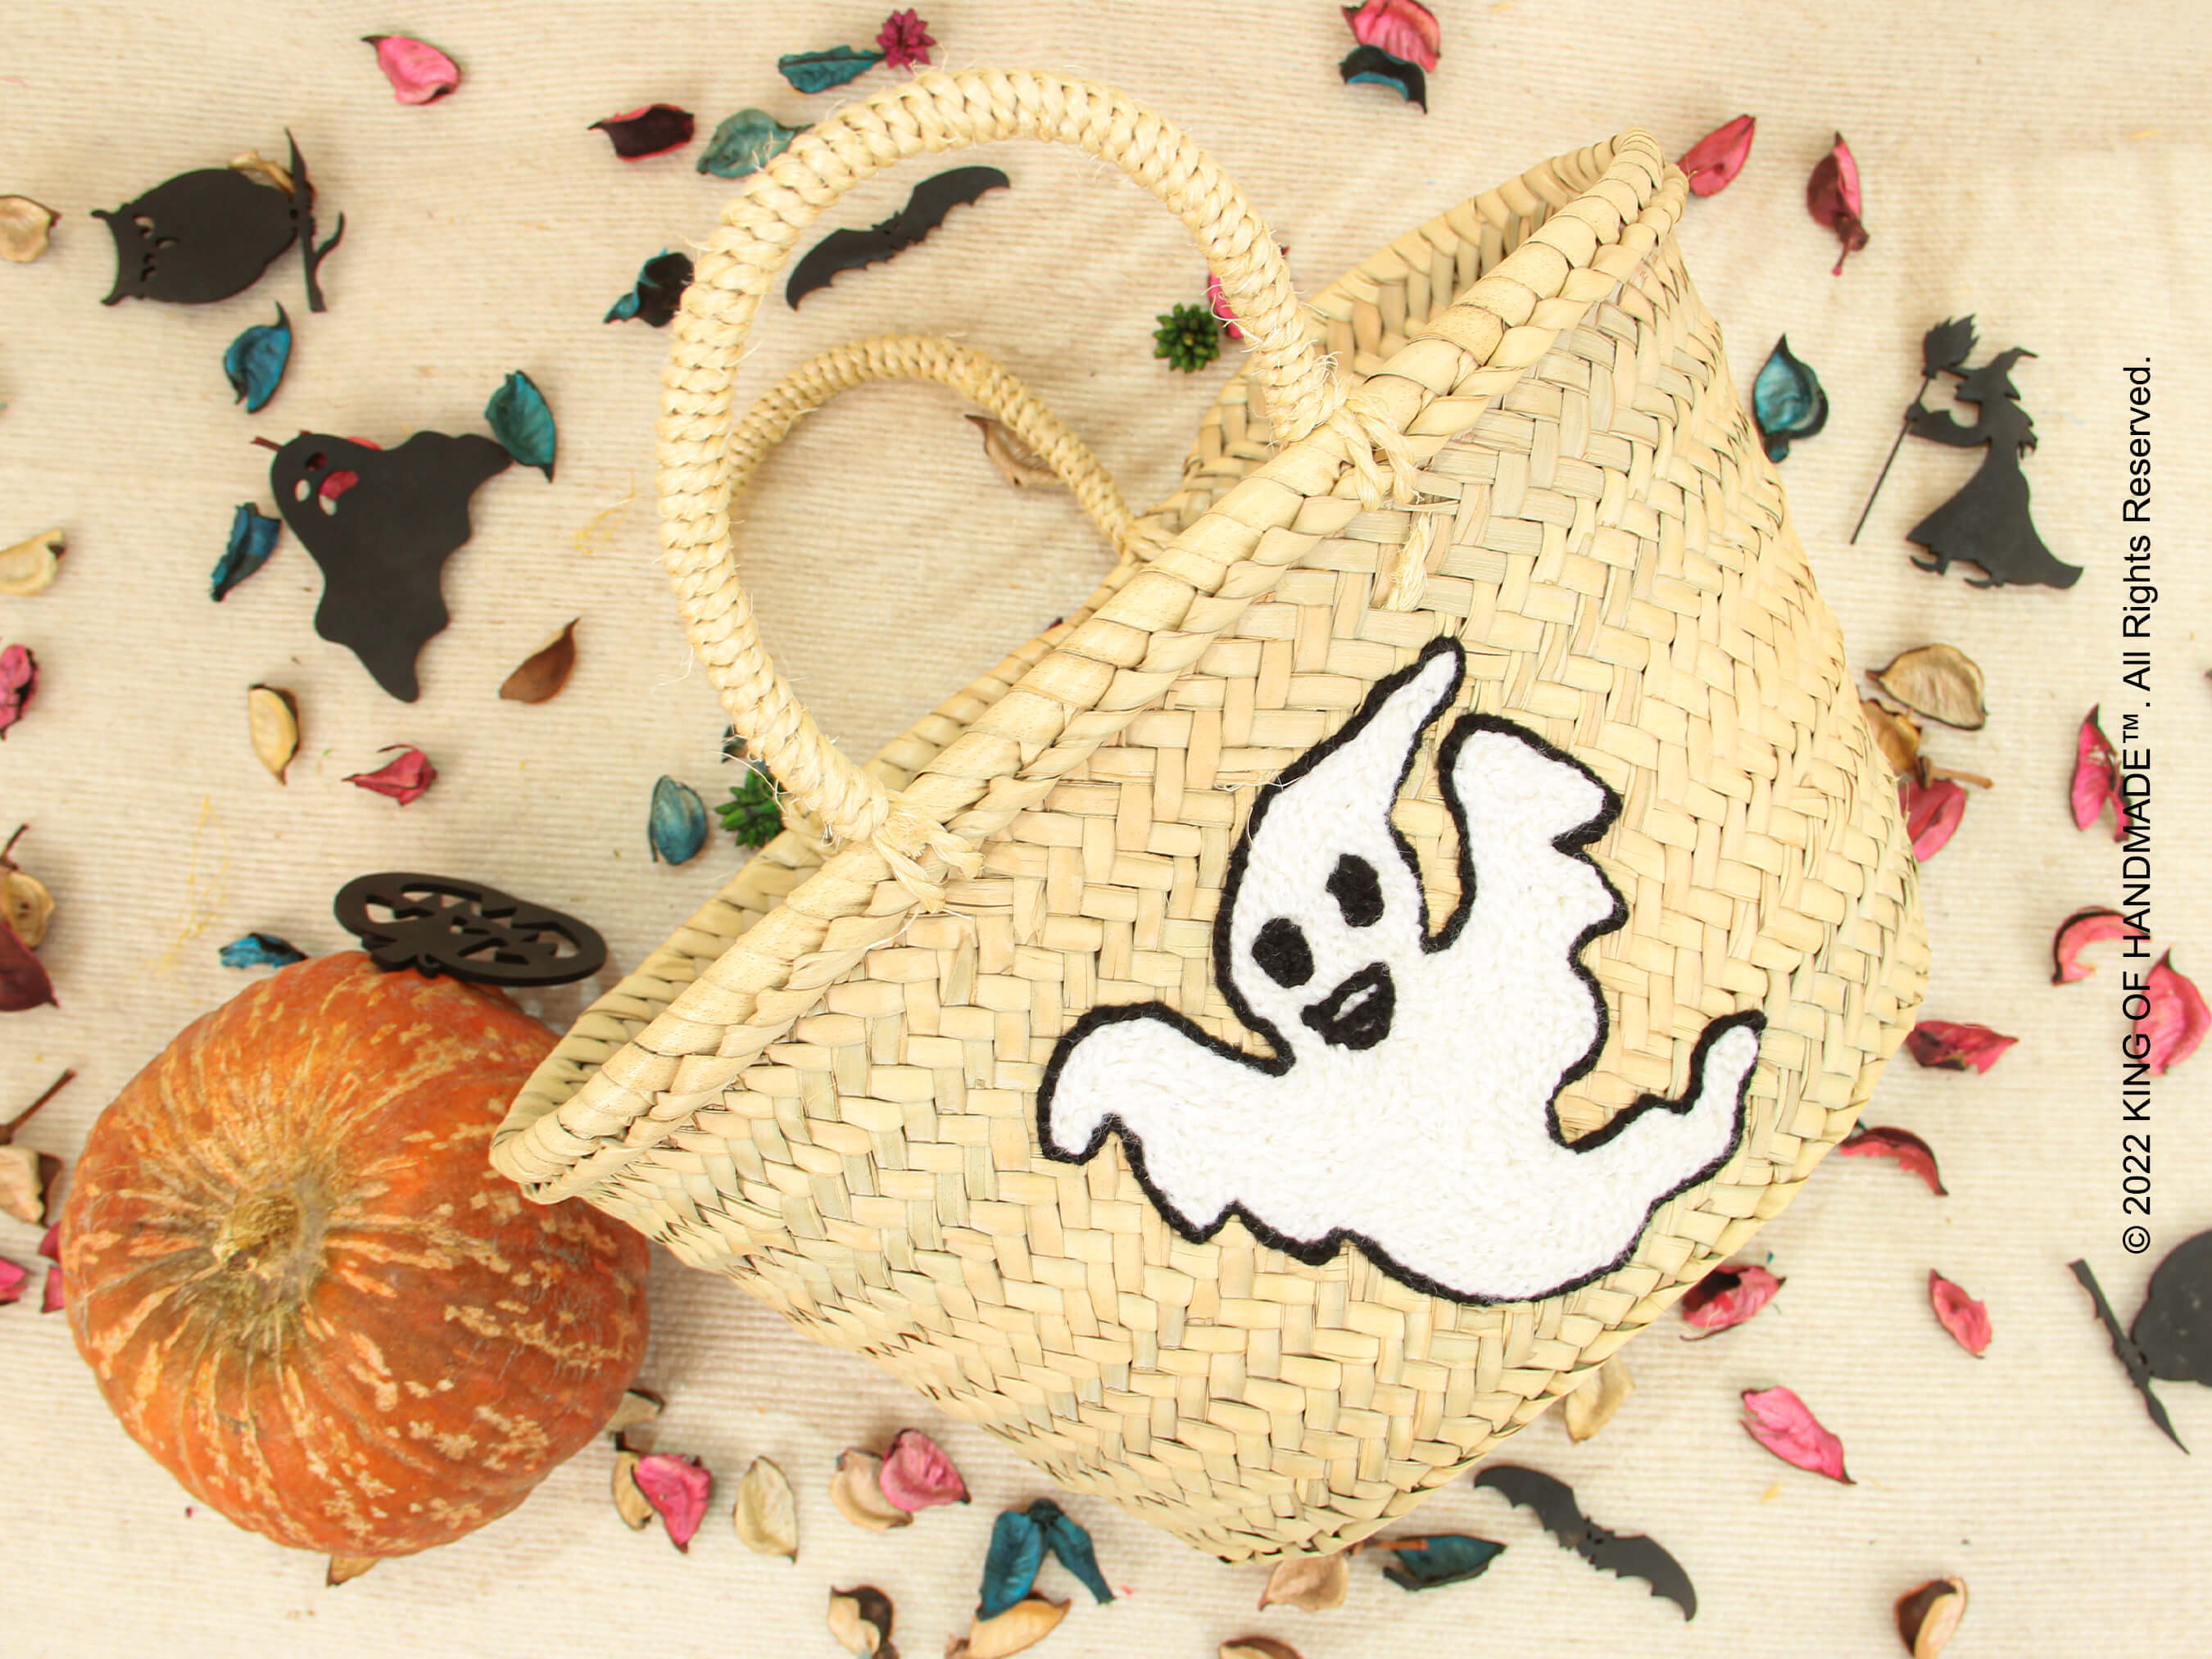 Ghost Pack ! Personalized Halloween Bag & Hat